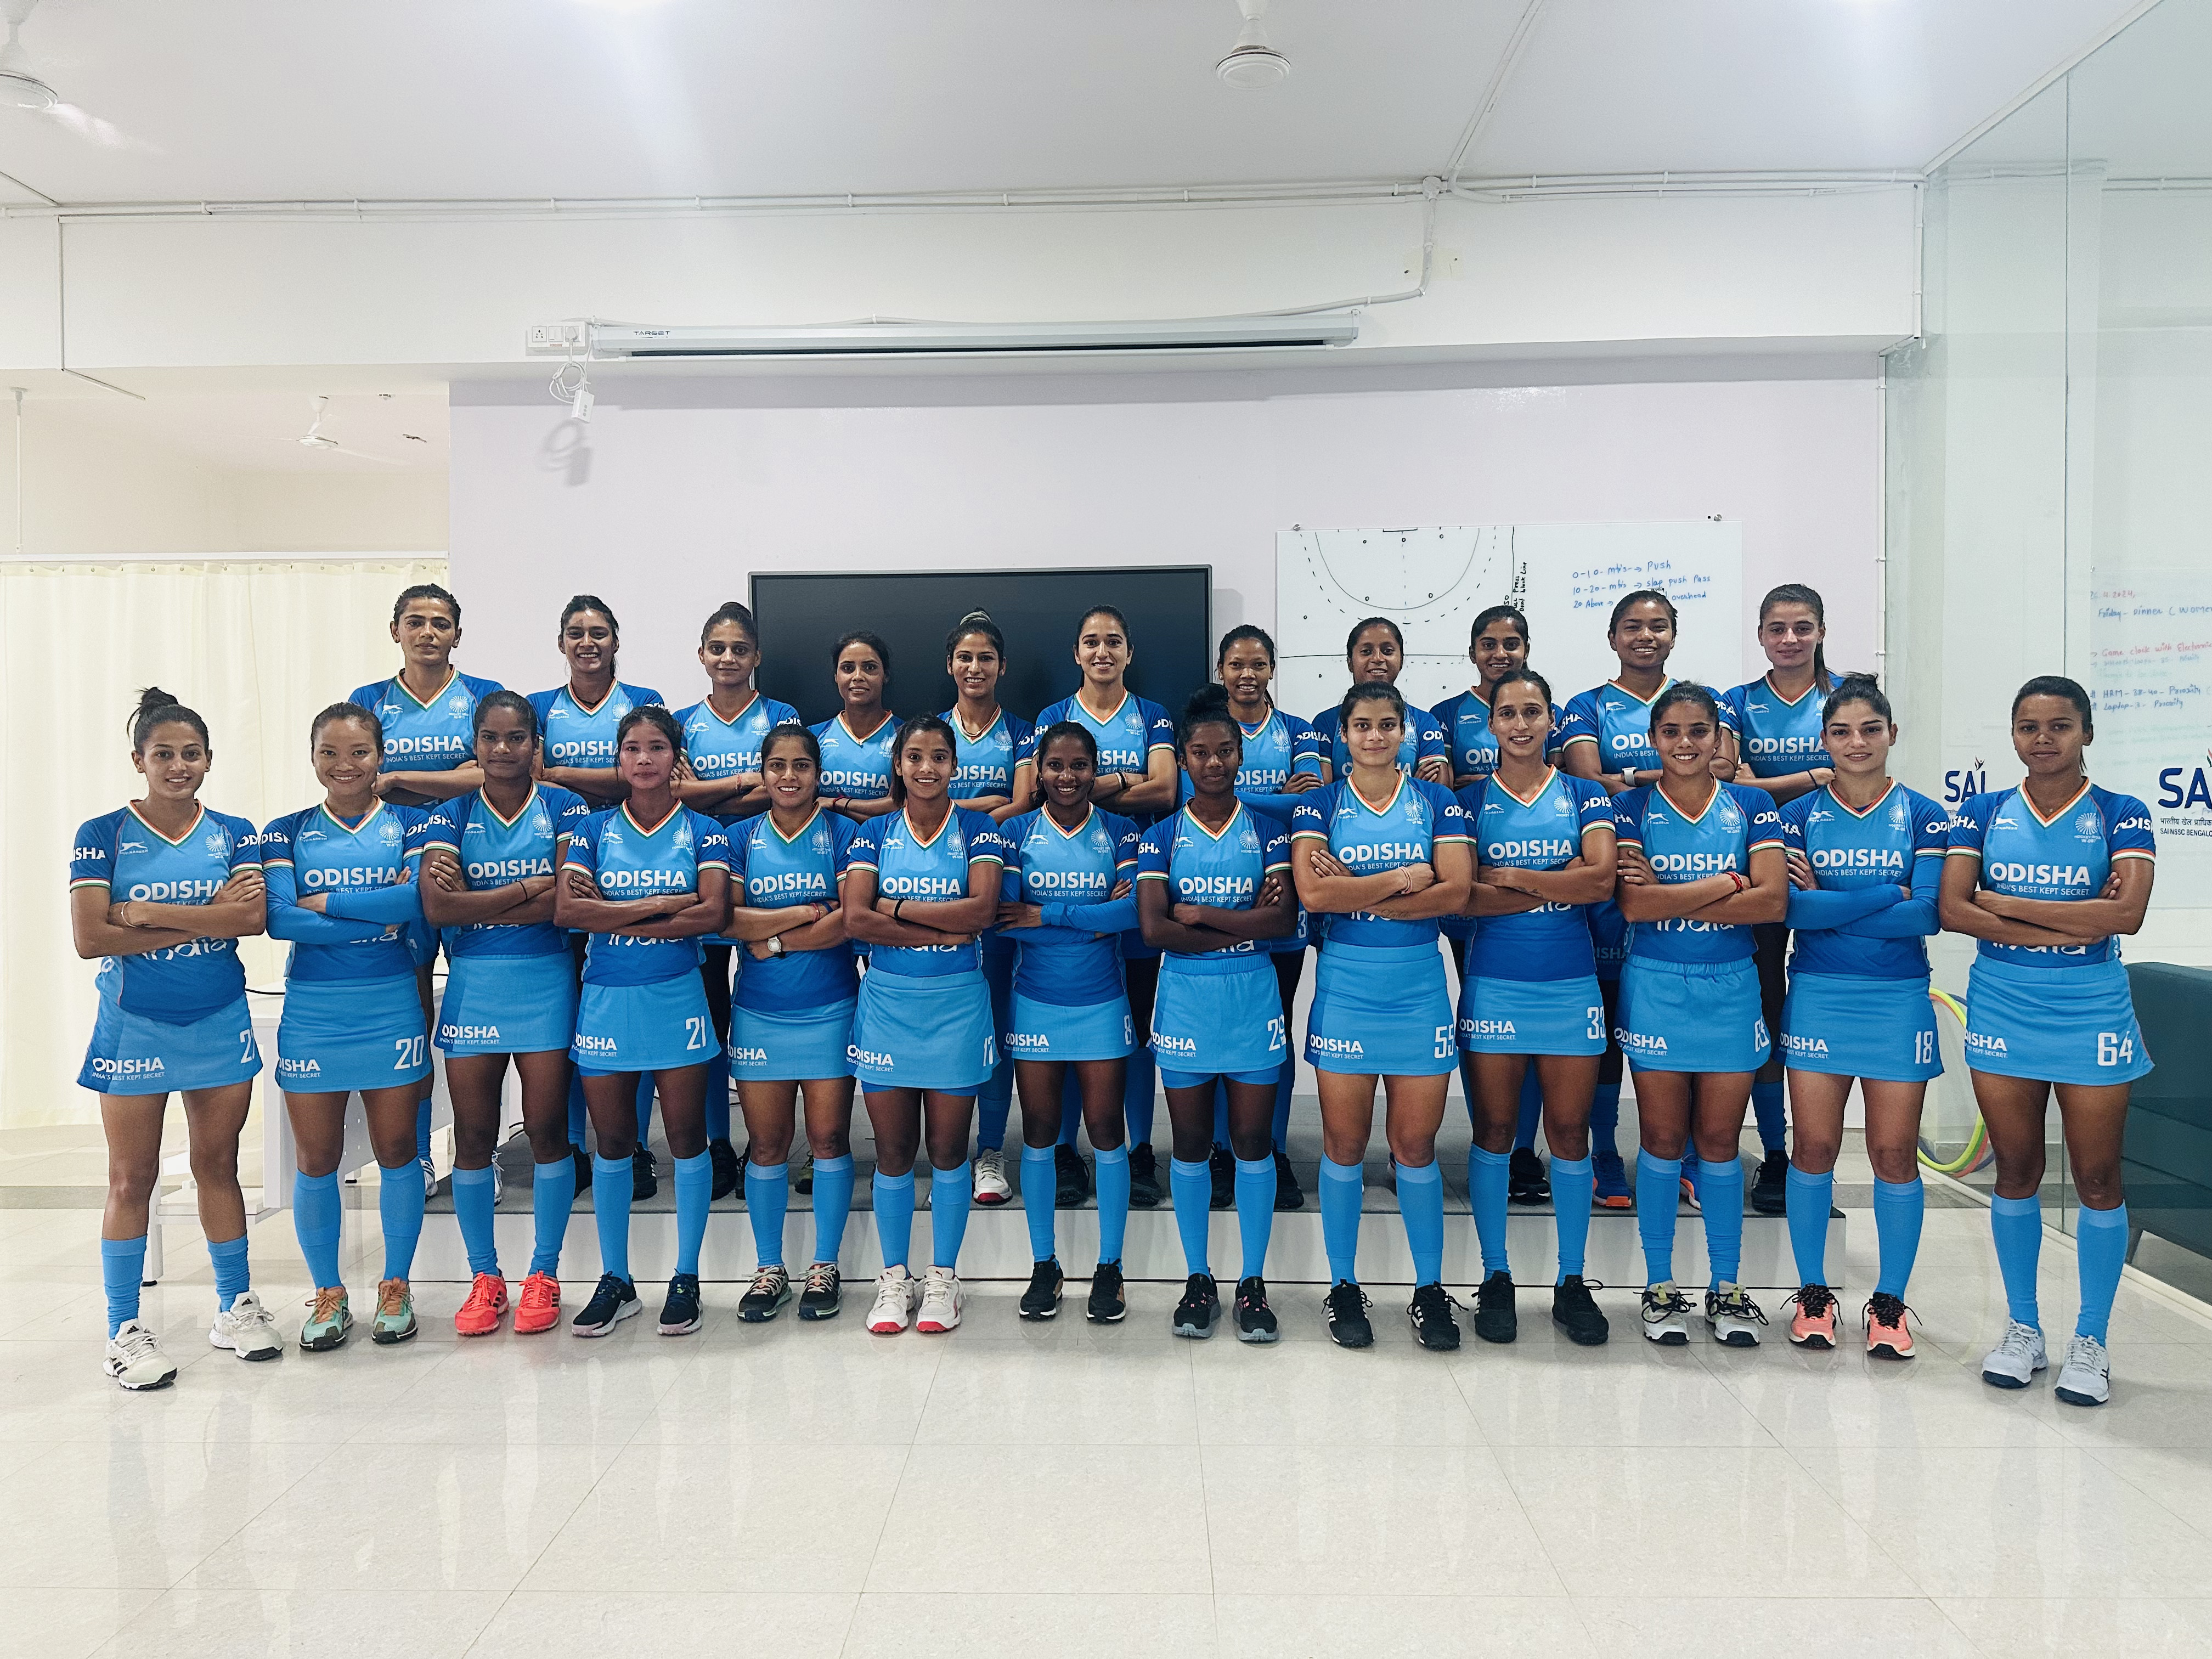 Salima Tete has been named the Captain while Navneet Kaur will serve as deputy during the Europe leg of the FIH Hockey Pro League